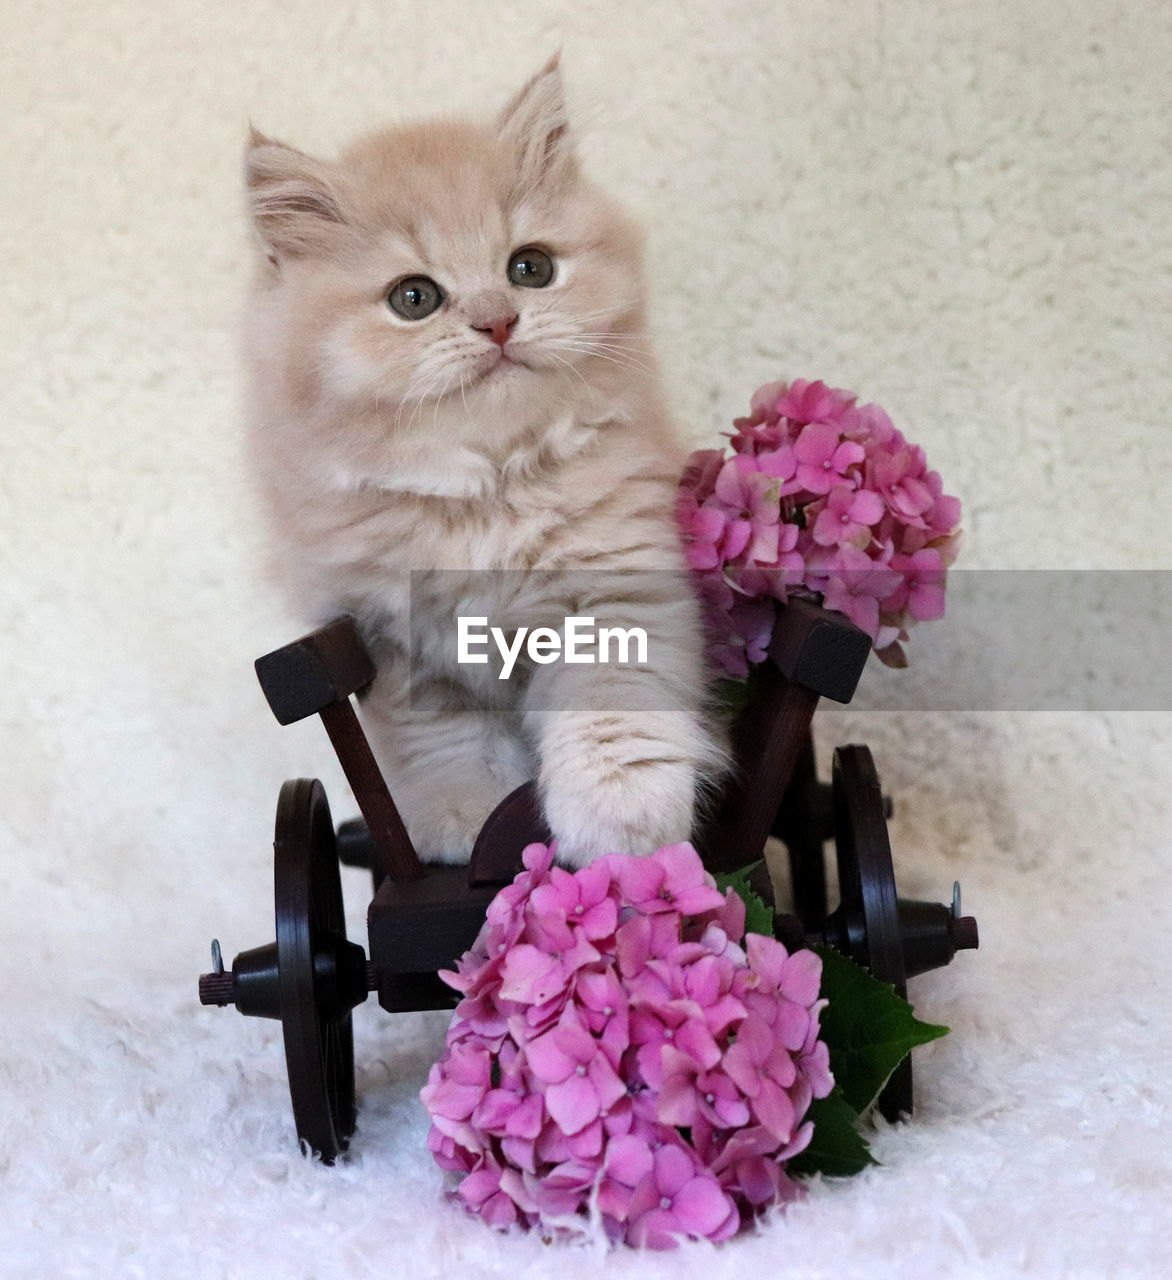 VIEW OF CAT AND PINK FLOWER